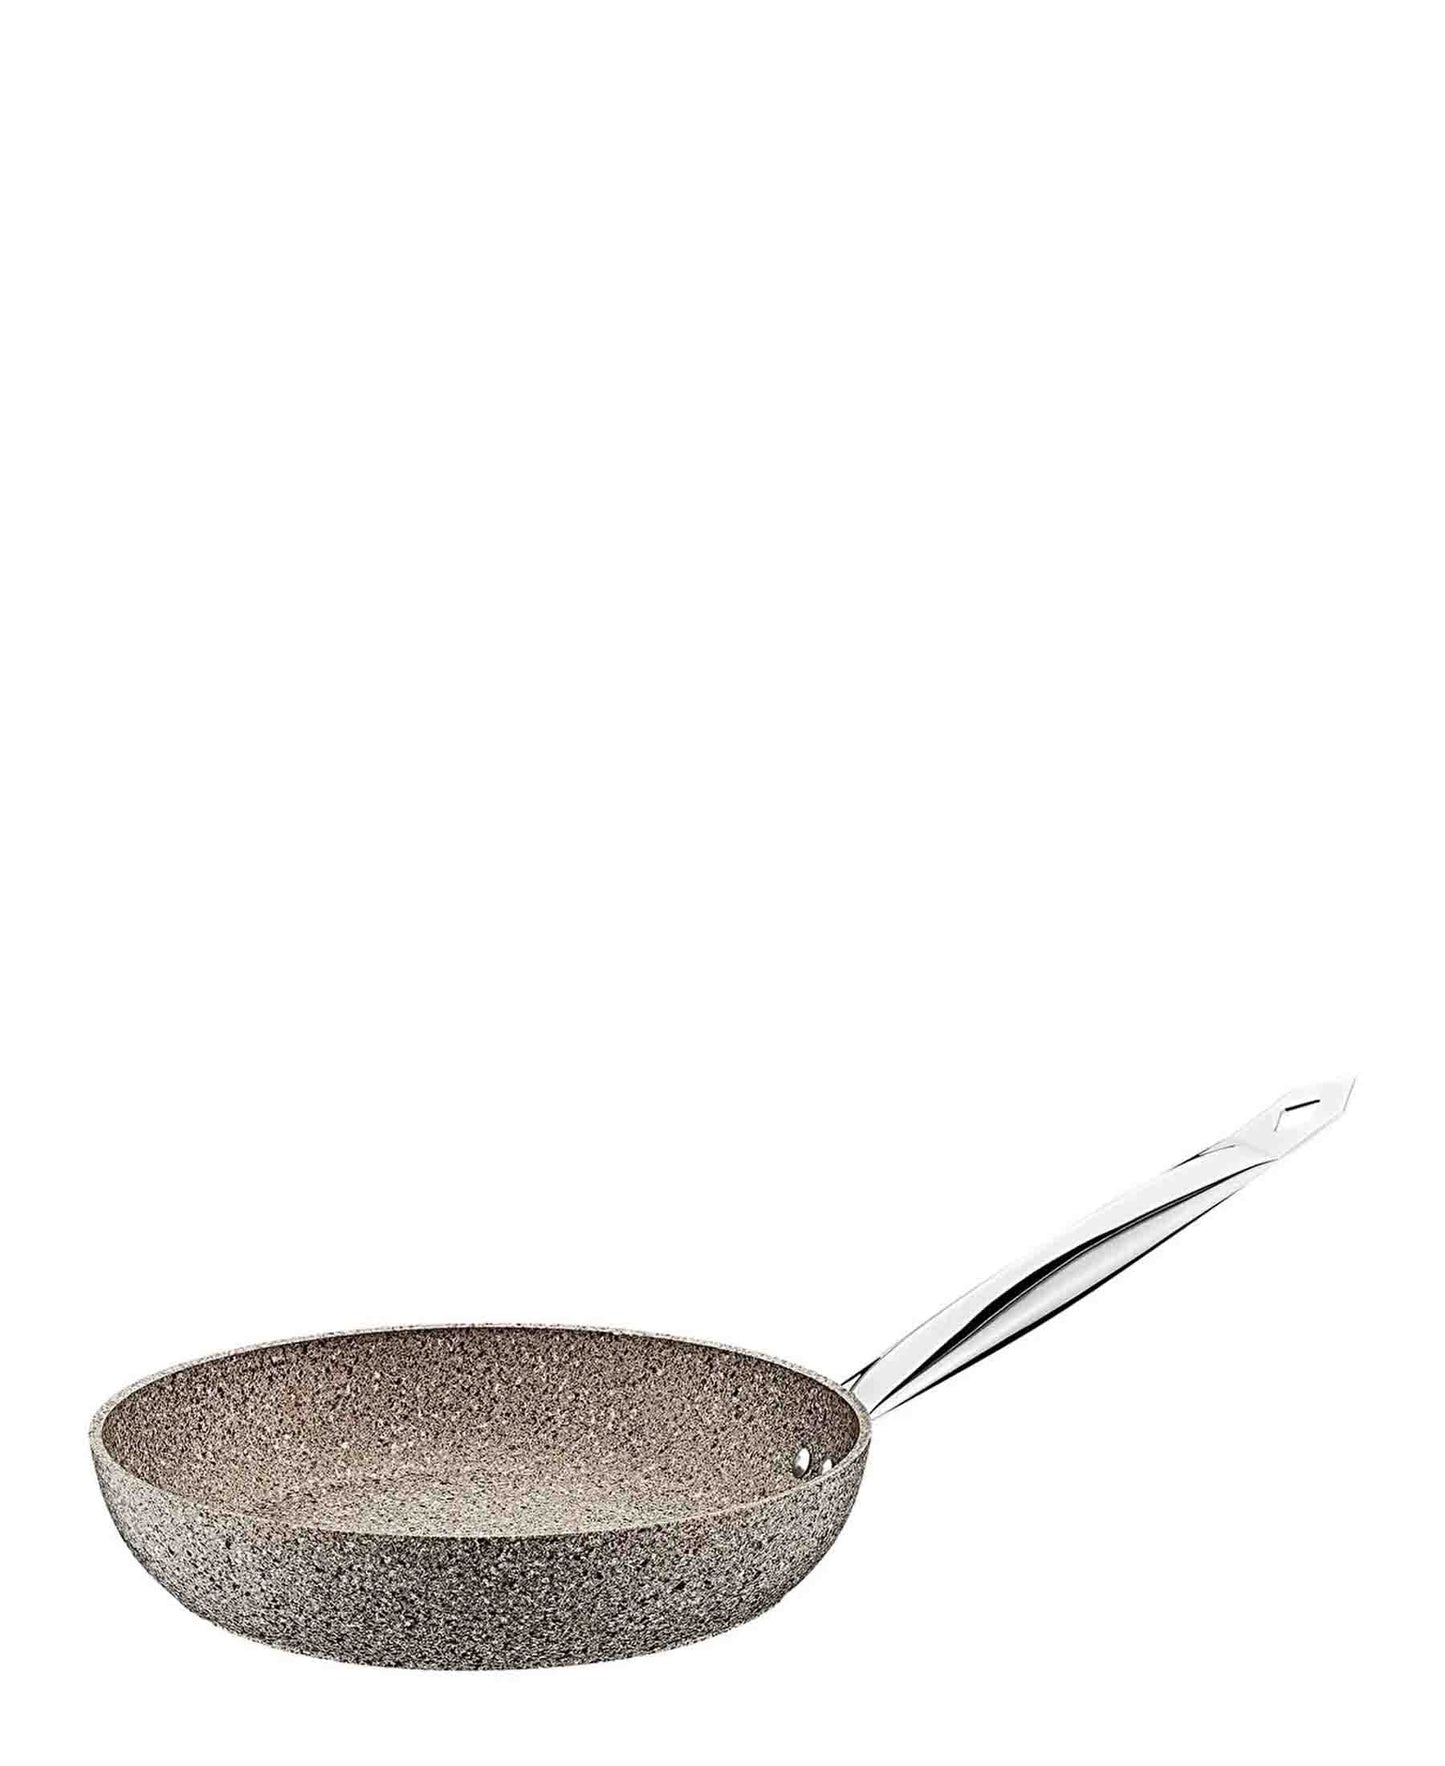 OMS Granite 26cm Non Stick Induction Fry Pan - Beige